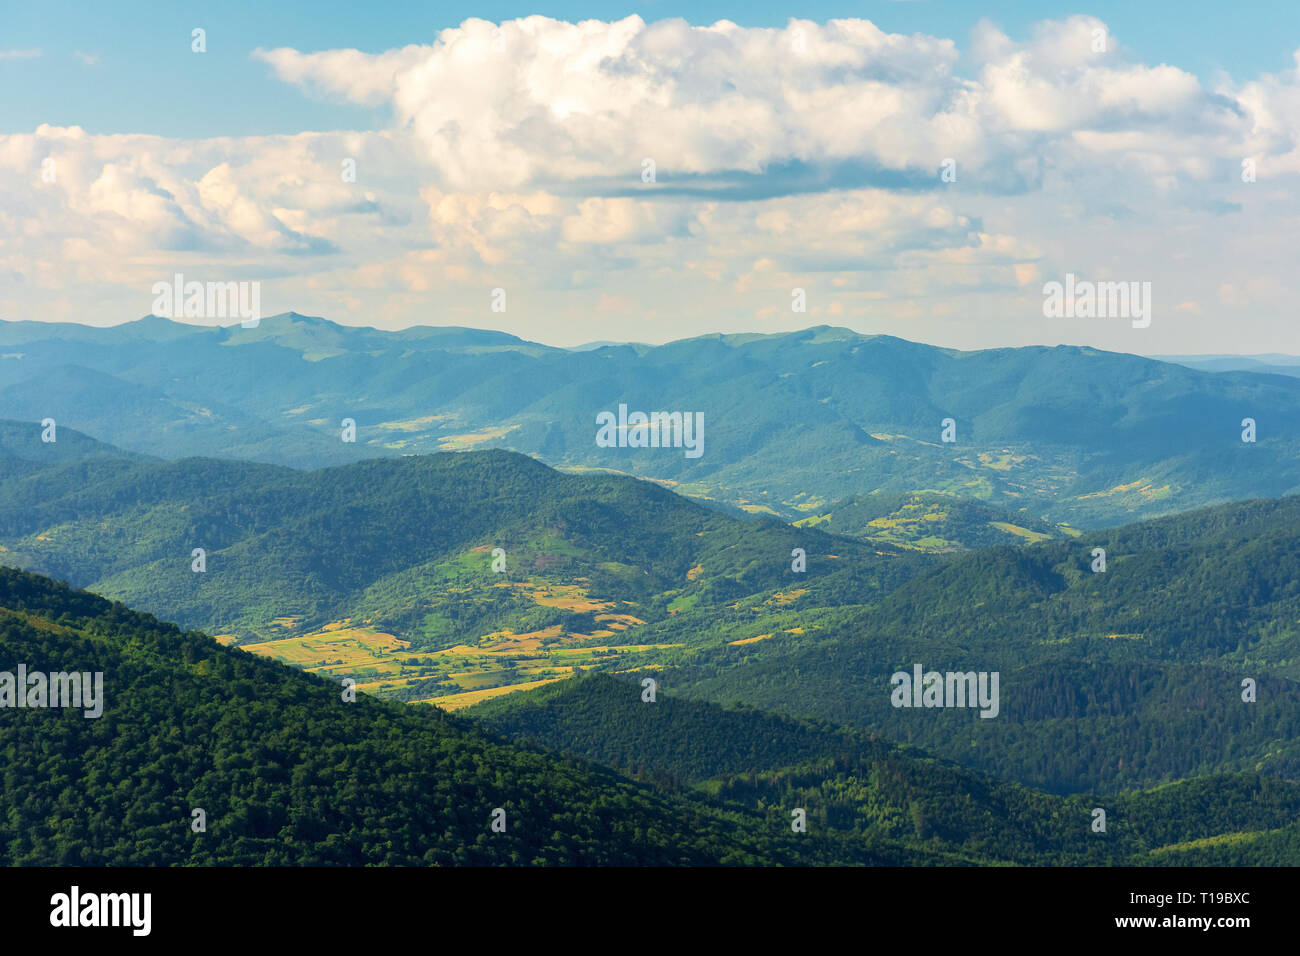 mountains, valleys and ridges of carpathians.  beautiful view of Beskid massif in summertime. Peaks of Bieszczady National Park in the distance. Stock Photo